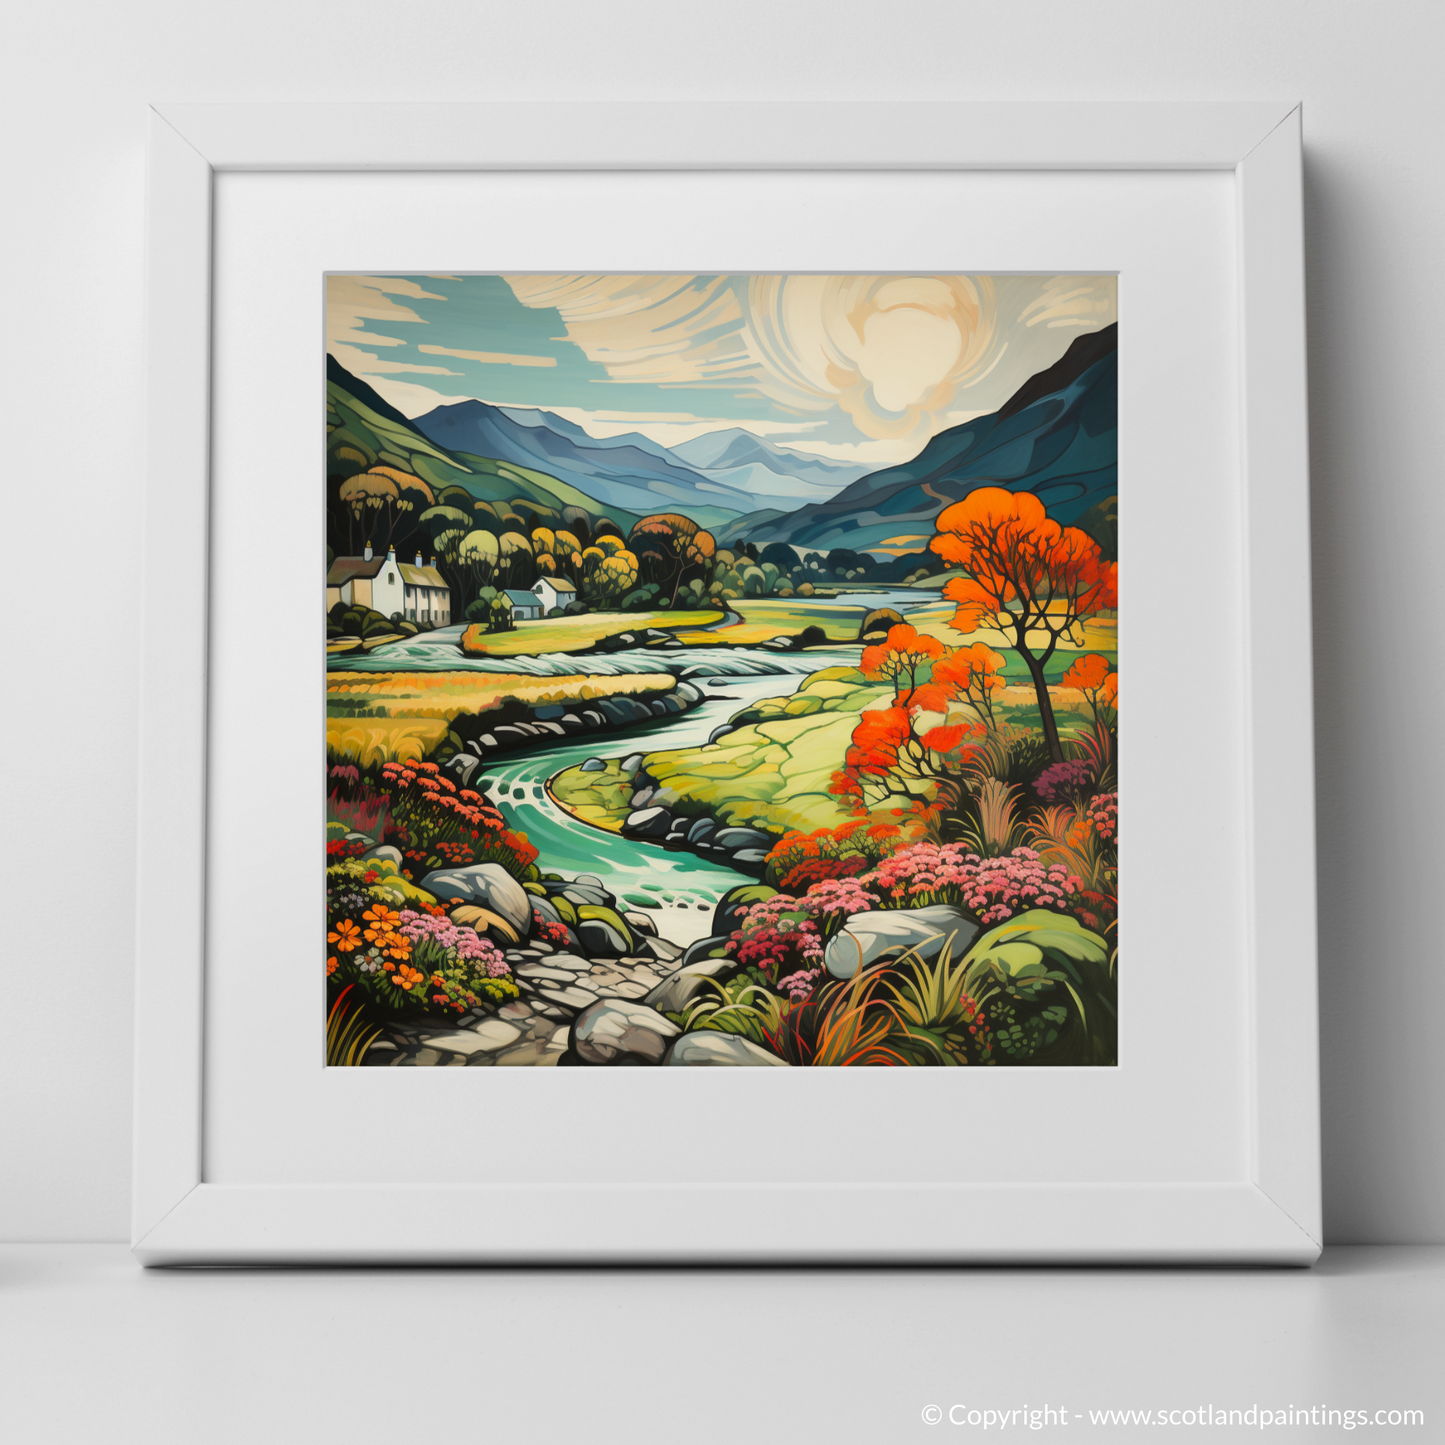 Enchanted Glen Lochay: A Naive Art Tribute to the Scottish Highlands